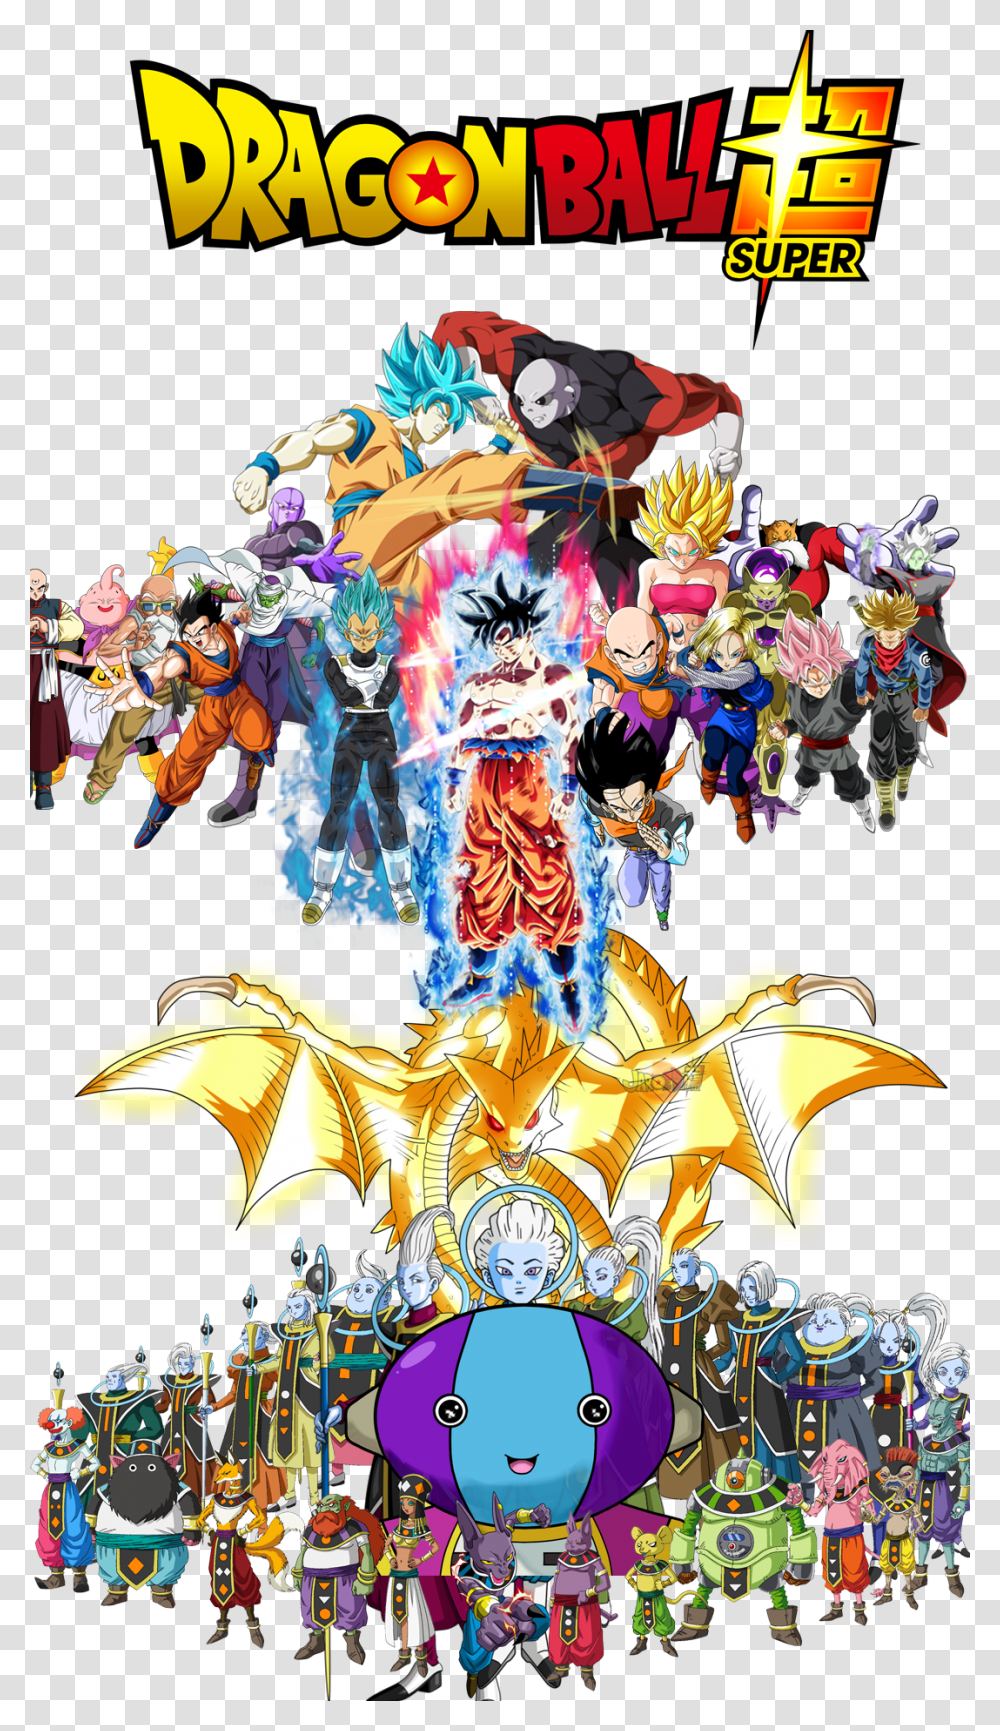 Free Download Dragon Ball Super Images Background Dragon Ball Super Wallpaper Iphone, Collage, Poster, Advertisement, Comics Transparent Png